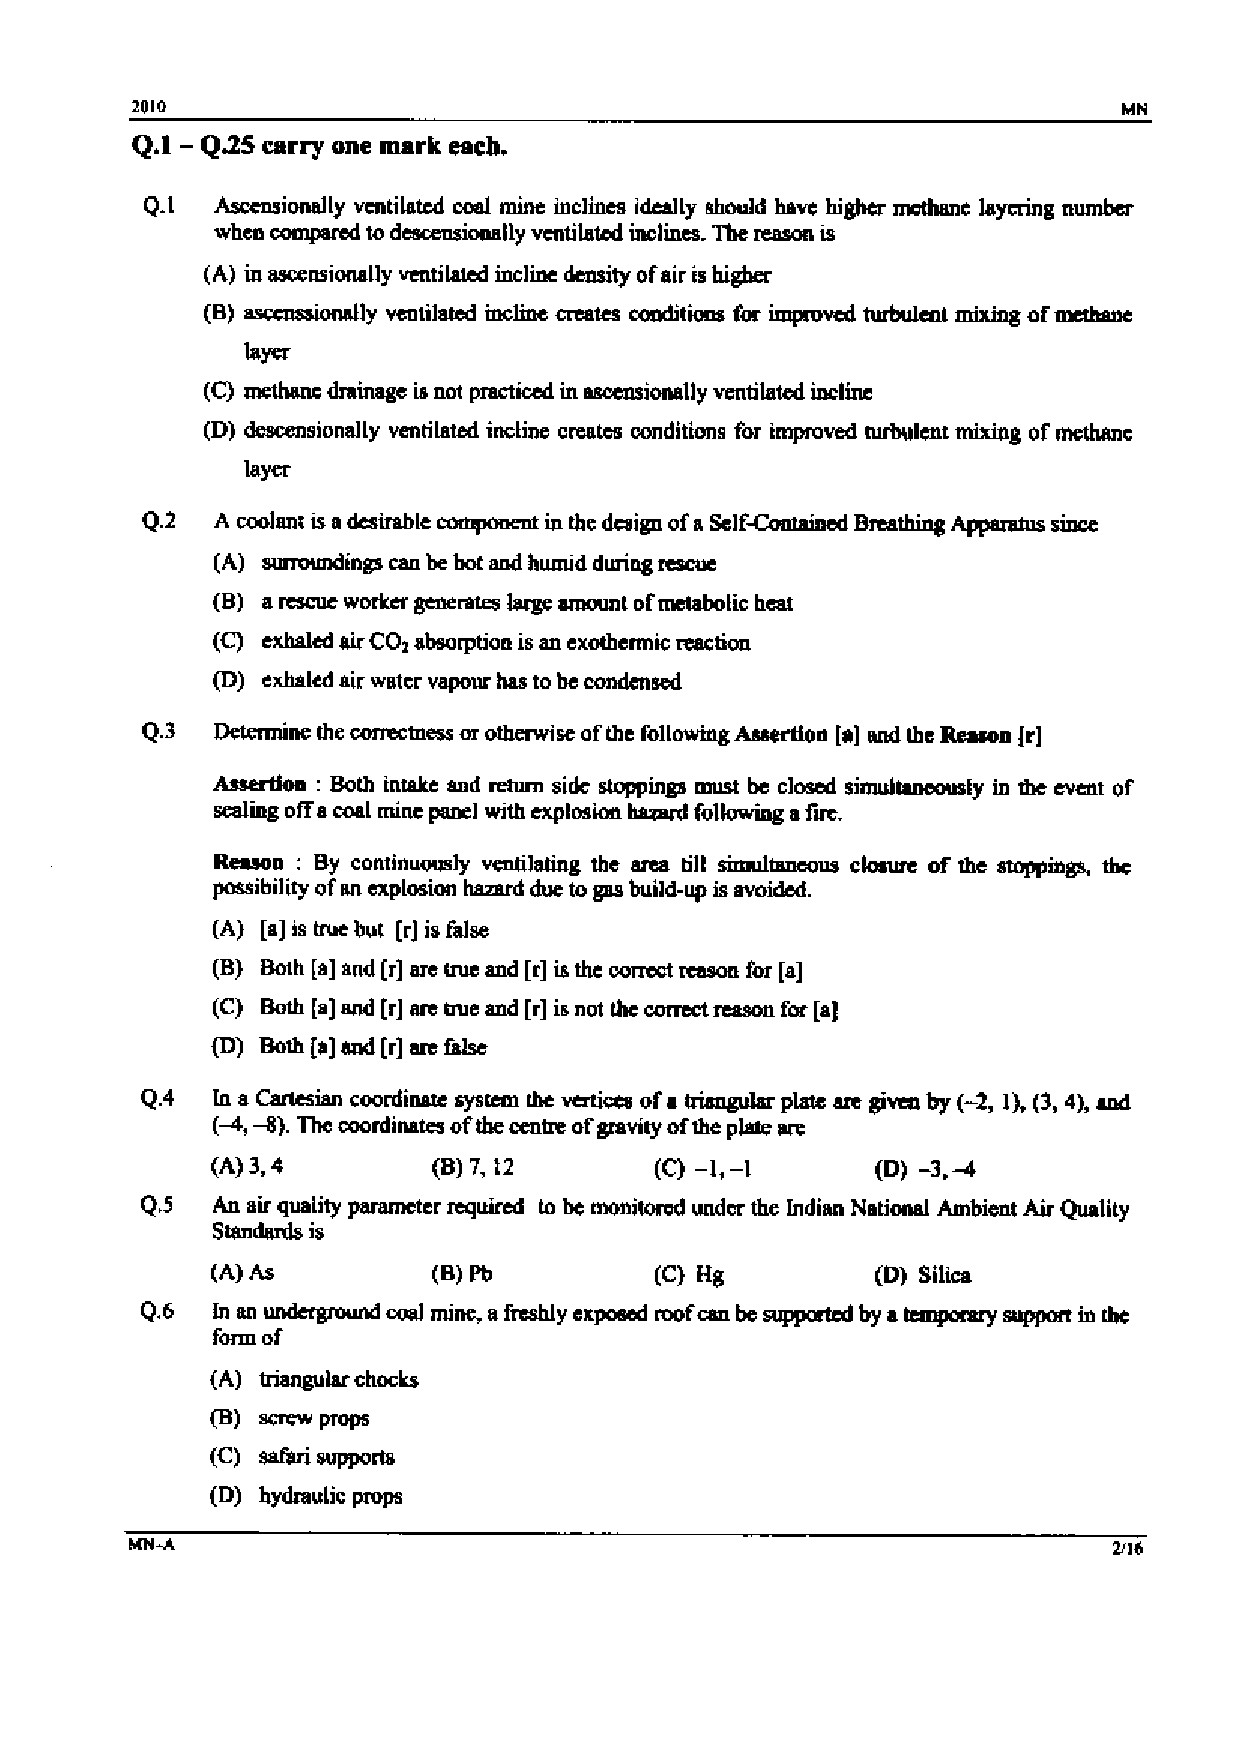 GATE Exam Question Paper 2010 Mining Engineering 2